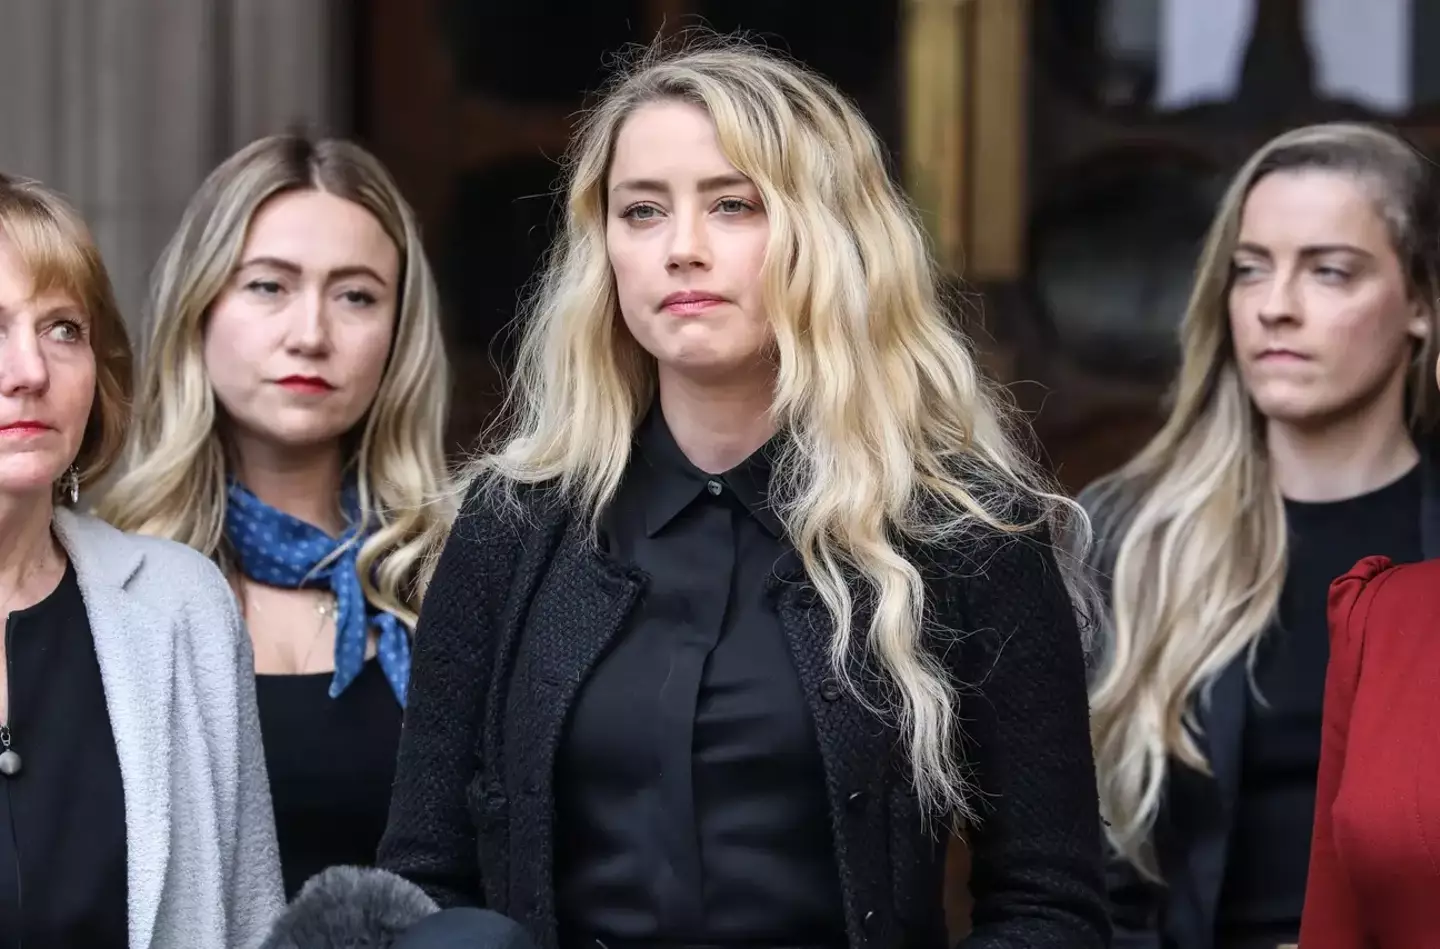 Amber Heard is accused of being verbally abusive to her former assistant.